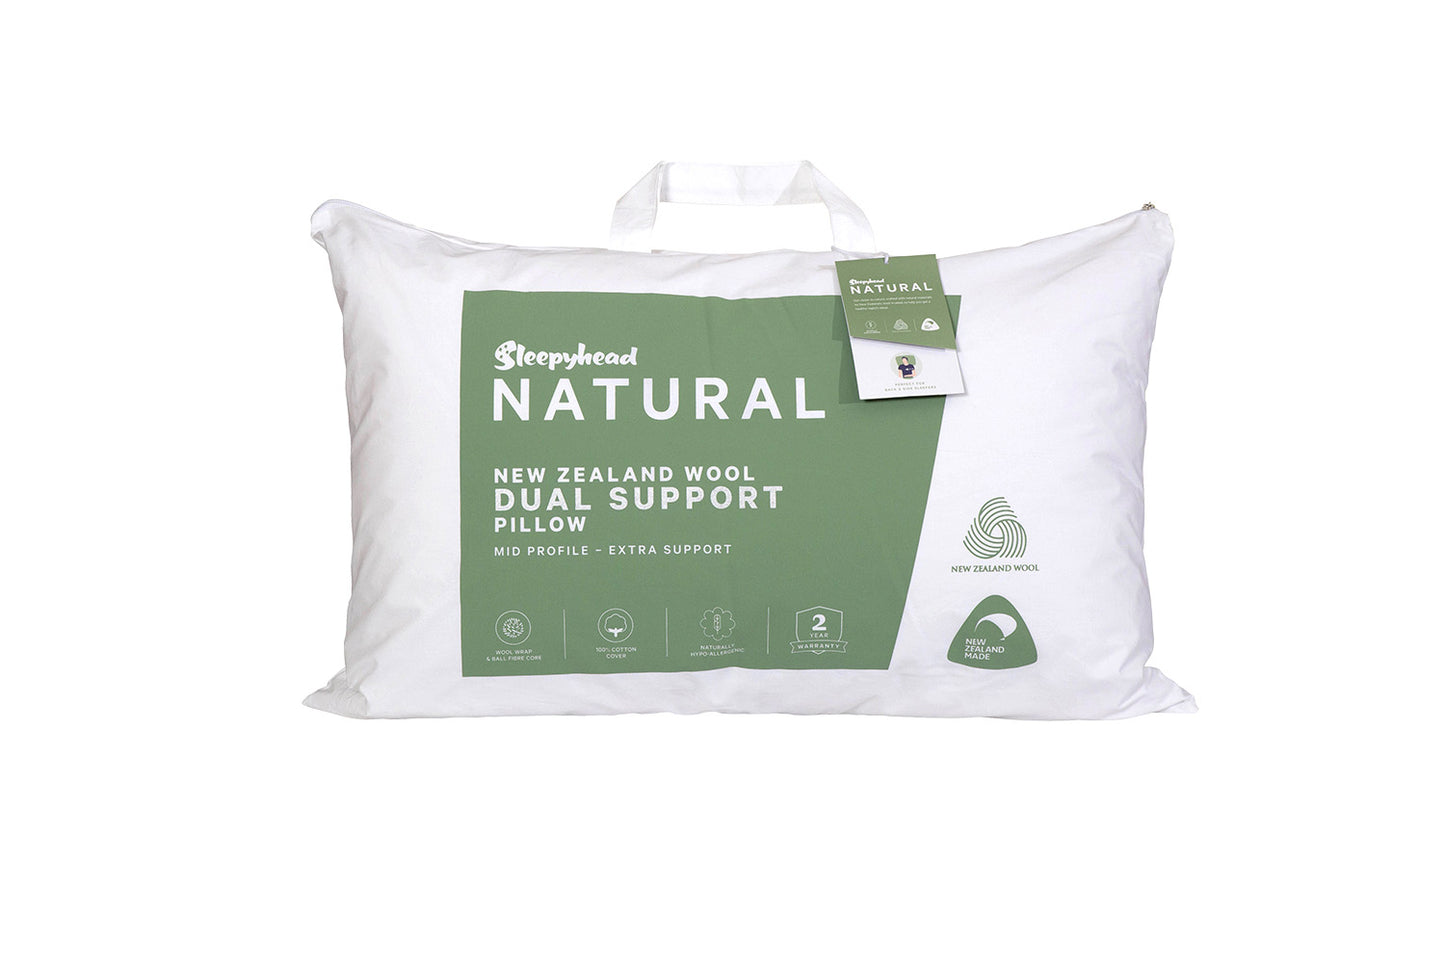 sleepyhead-natural-nz-wool-dual-support-mid-profile-extra-support-pillow-2